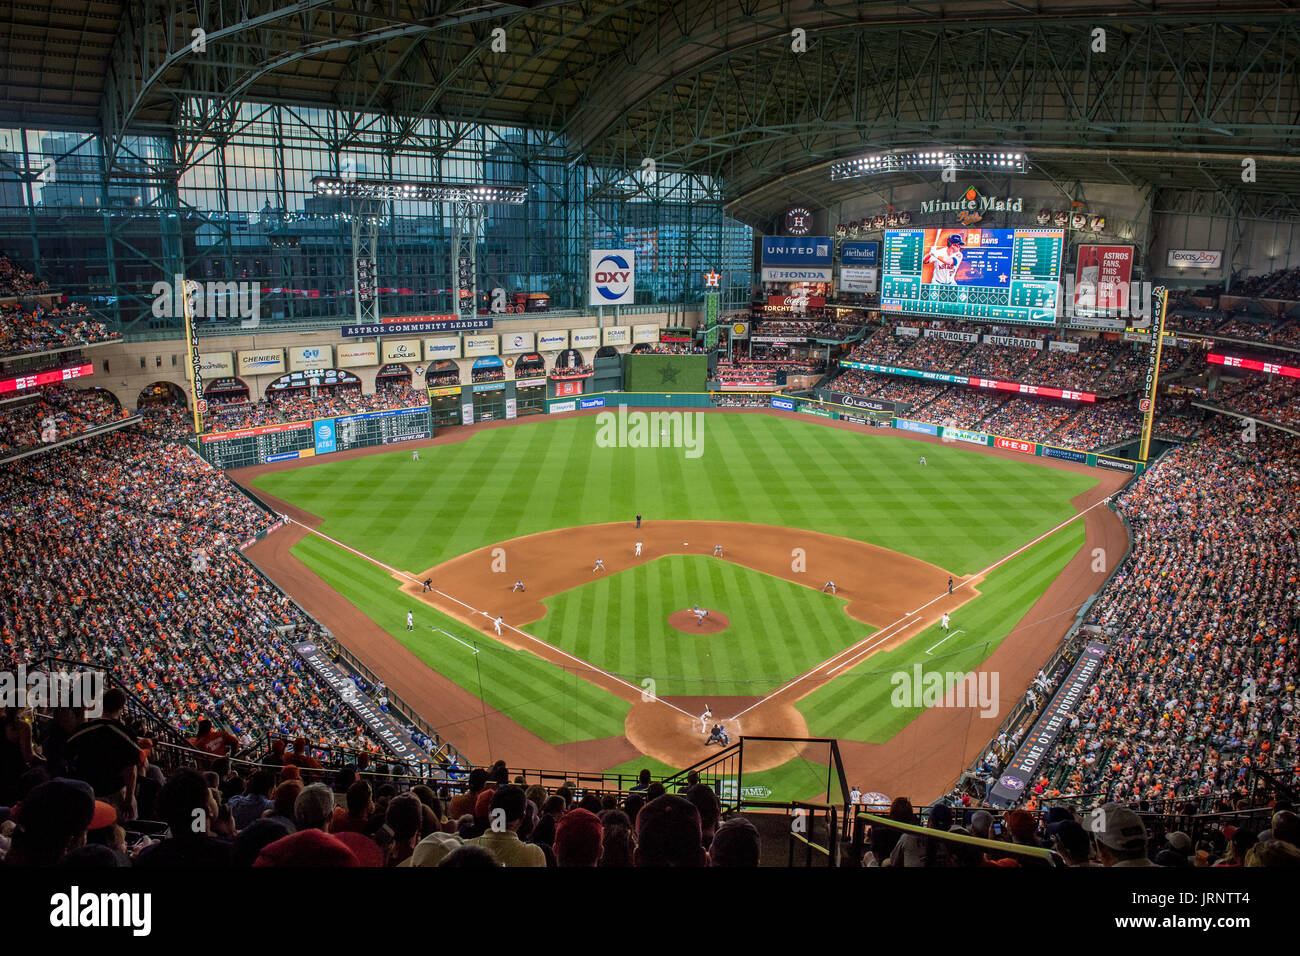 Raw video: Timelapse of roof opening at Minute Maid Park for